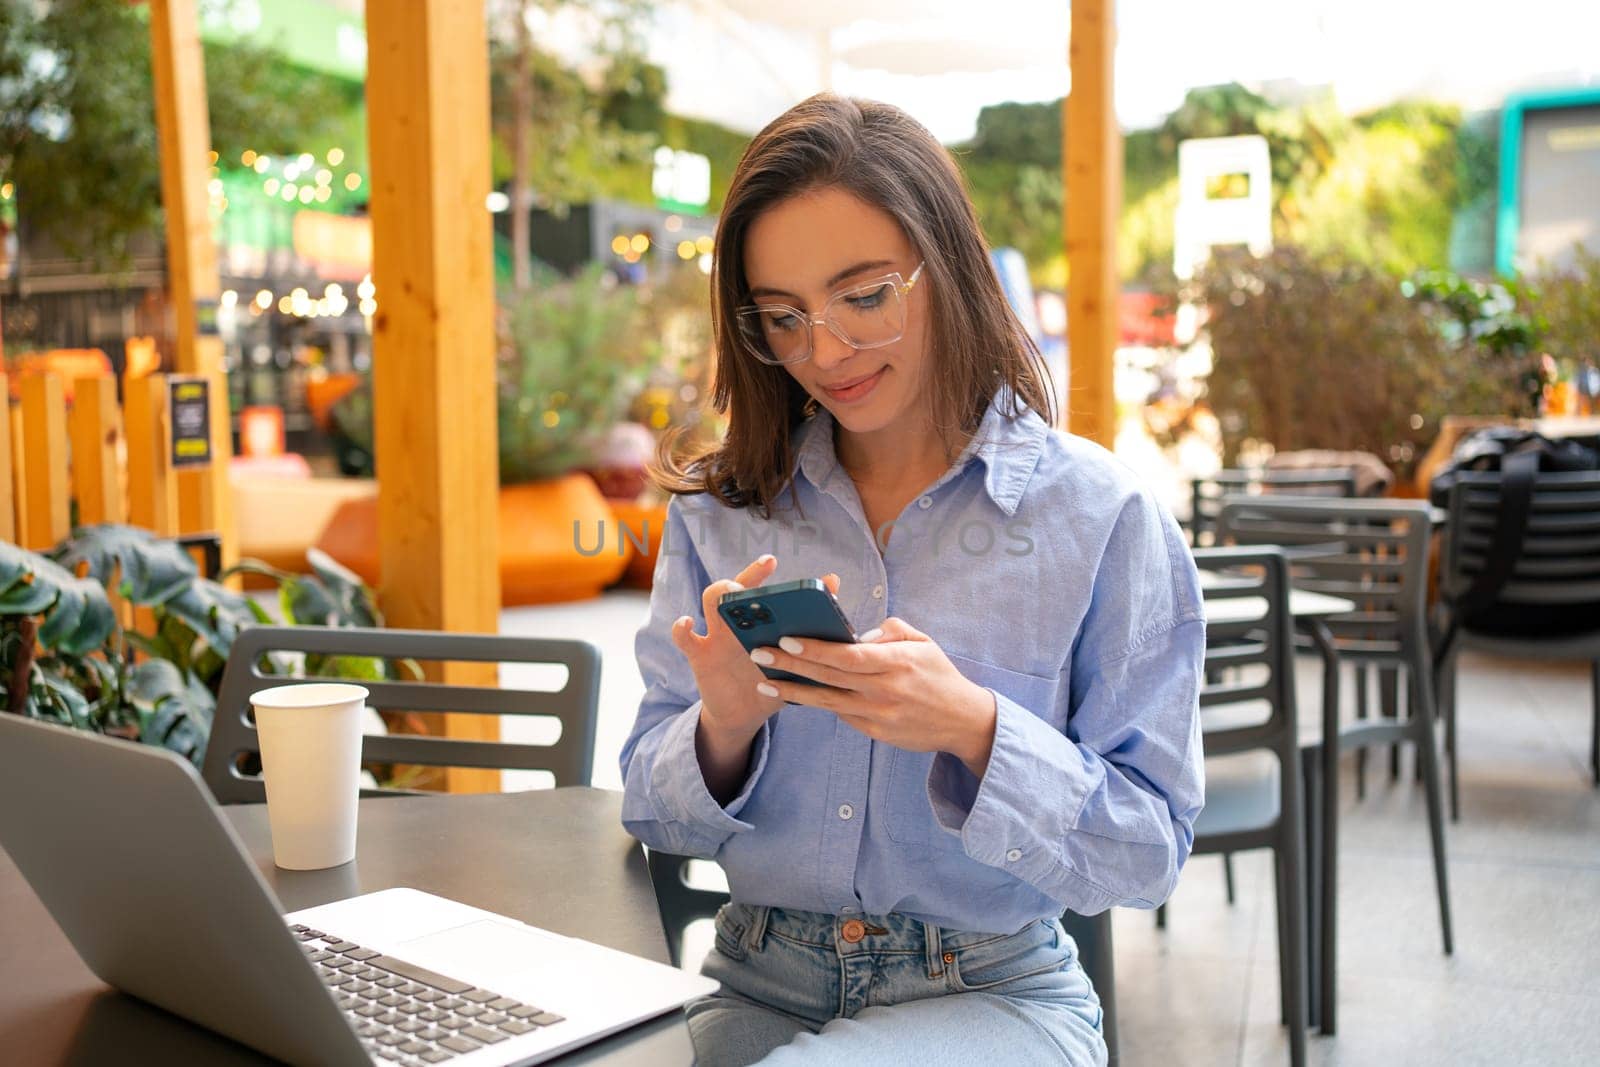 Freelance worker doing remote work planning on mobile 5g smartphone internet schedule. Woman entrepreneur with mobile phone in outdoor cafe, restaurant on social media app online.